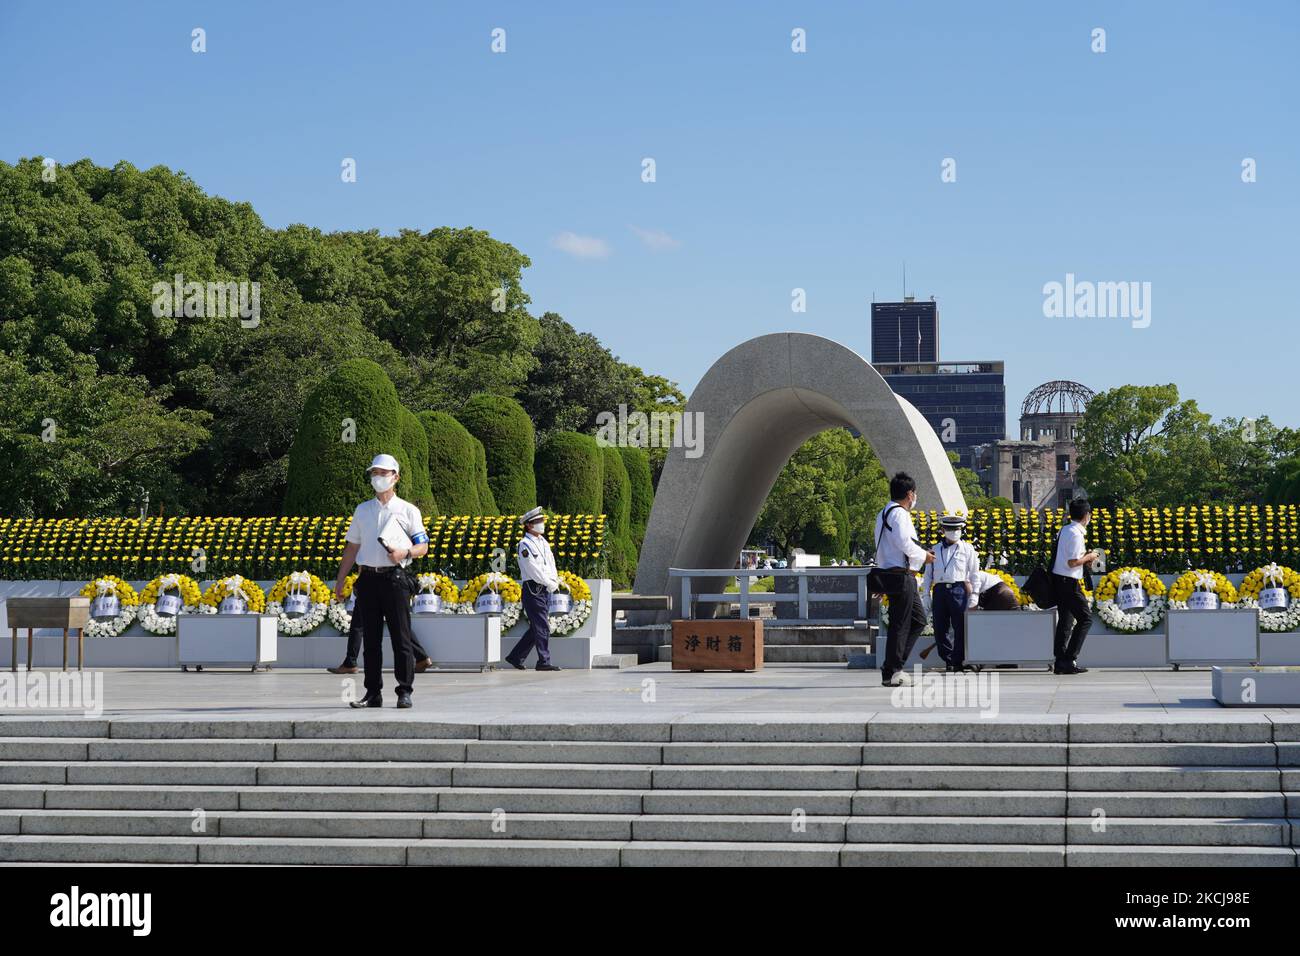 A commemoration is held in Hiroshima Peace Memorial Park on August 6, 2021 in Hiroshima, Japan. Hiroshima marks the 76th anniversary of the atomic bombing, which killed about 150,000 people and destroyed the entire city for the first bombing with a nuclear weapon in war. Survivors and limited guests including Prime Minister Yoshihide Suga attend the Peace Memorial Ceremony amid the coronavirus pandemic. (Photo by Jinhee Lee/NurPhoto) Stock Photo